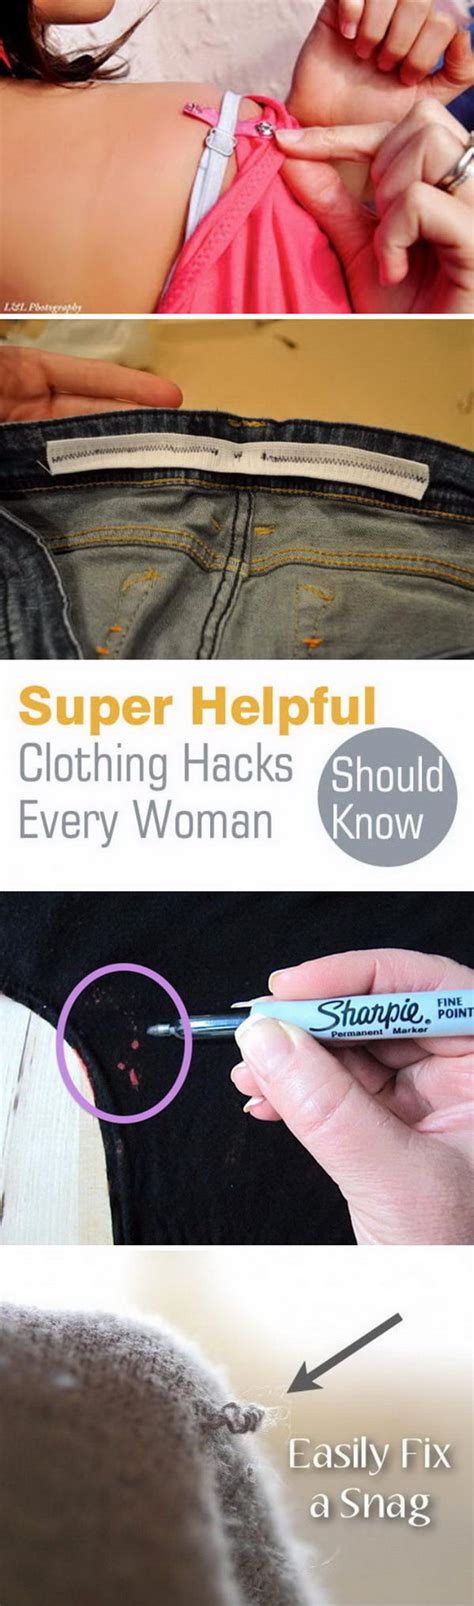 Super Helpful Clothing Hacks Every Woman Should Know